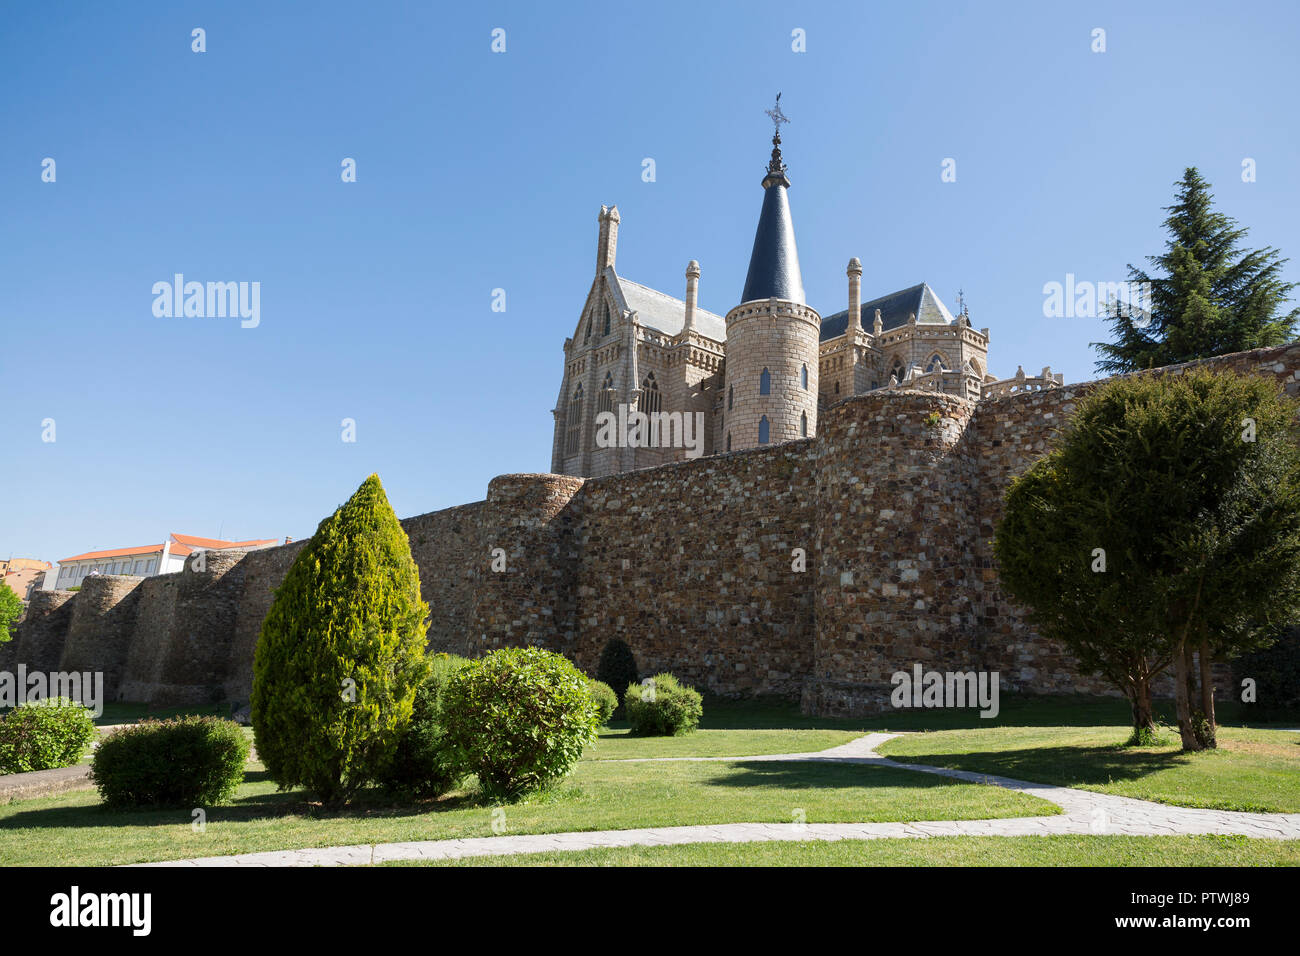 Astorga, Spain: View of the Roman Wall and Episcopal Palace of Astorga drom Parque Del Melgar. Built by Catalan architect Antoni Gaudí between 1889 an Stock Photo